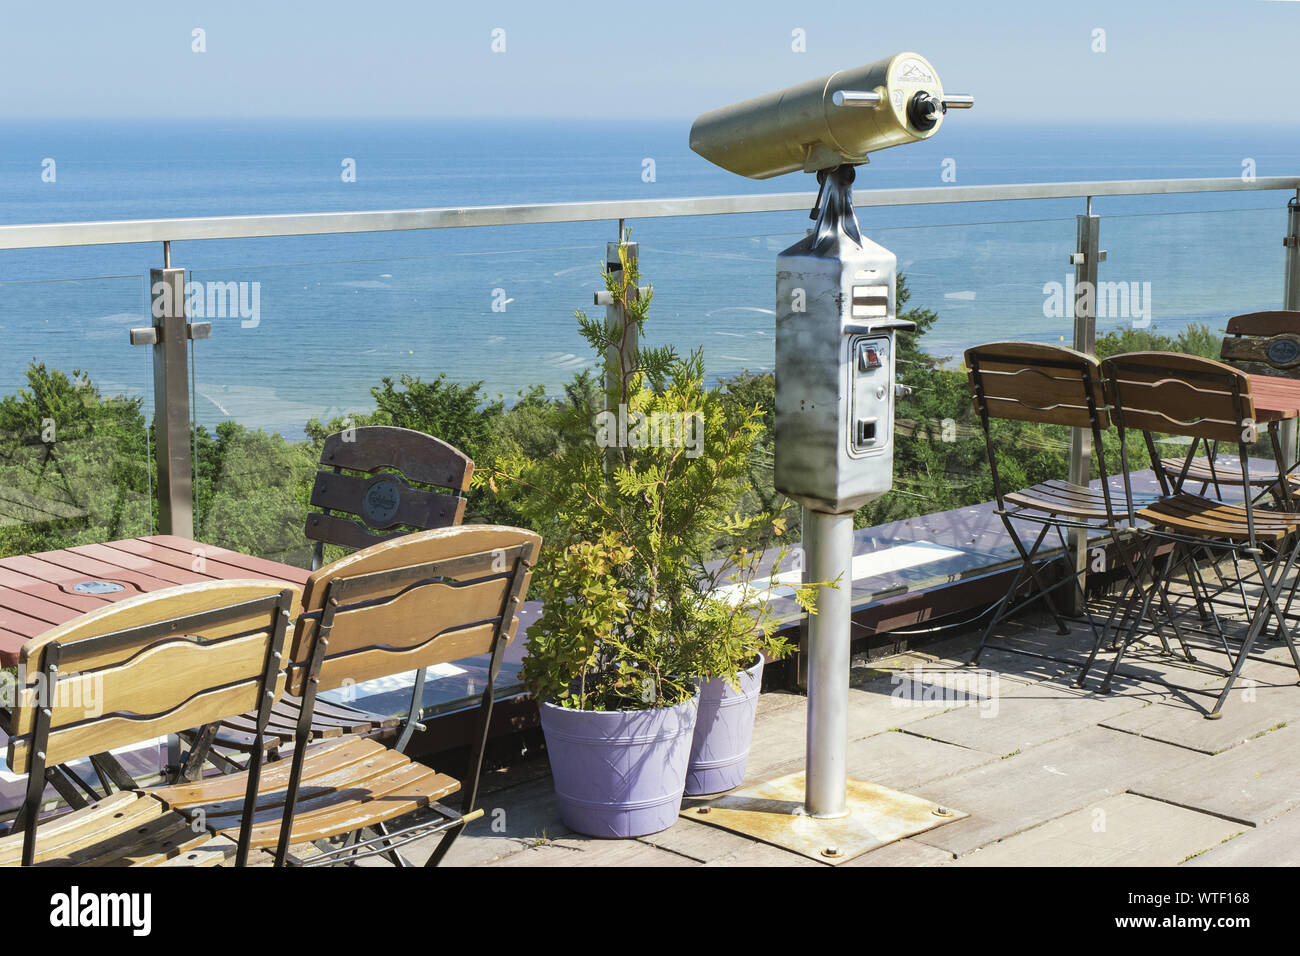 Rooftop cafe 'Widokowka' with open terrace and a tower viewer overlooking the Baltic sea, in Kolobrzeg, Poland. Stock Photo